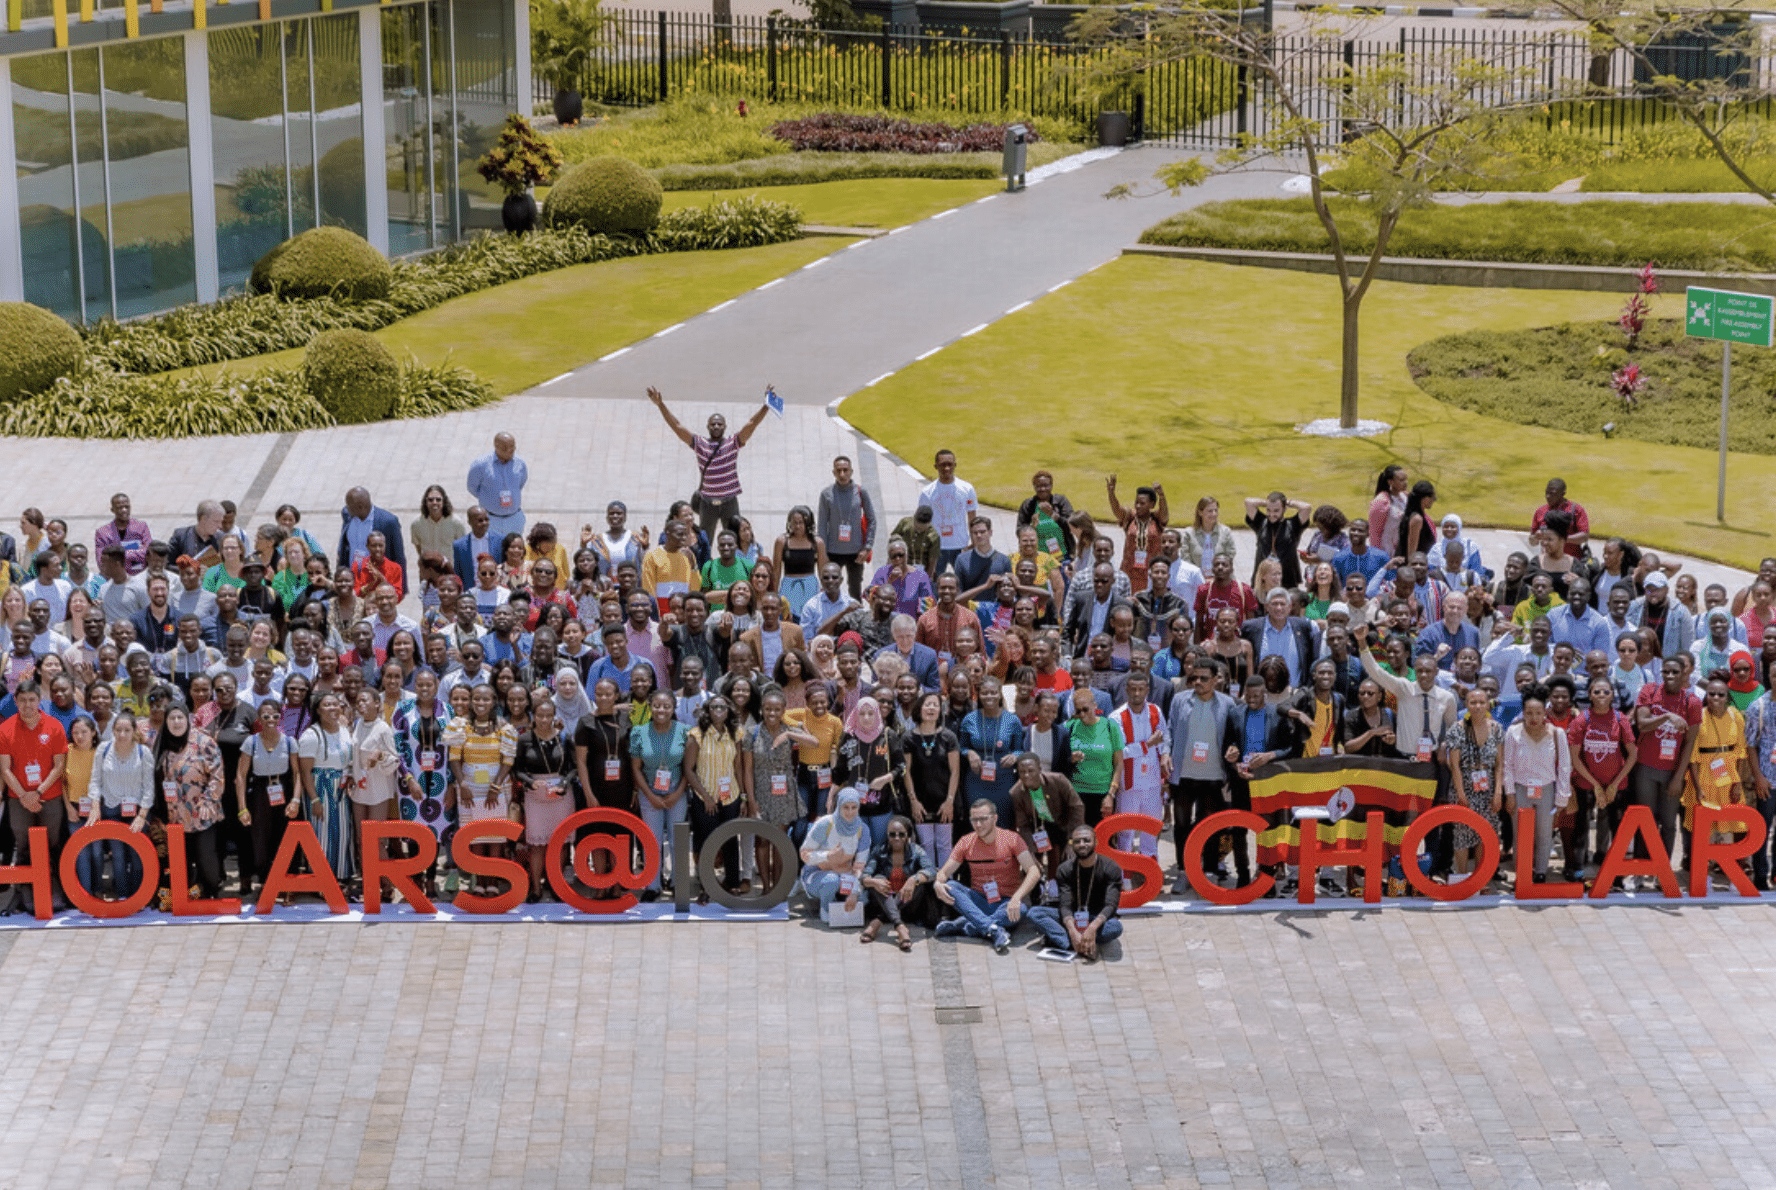 Mastercard Foundation Baobab Summit 2022 Group Photo in front of Scholars at 10 sign